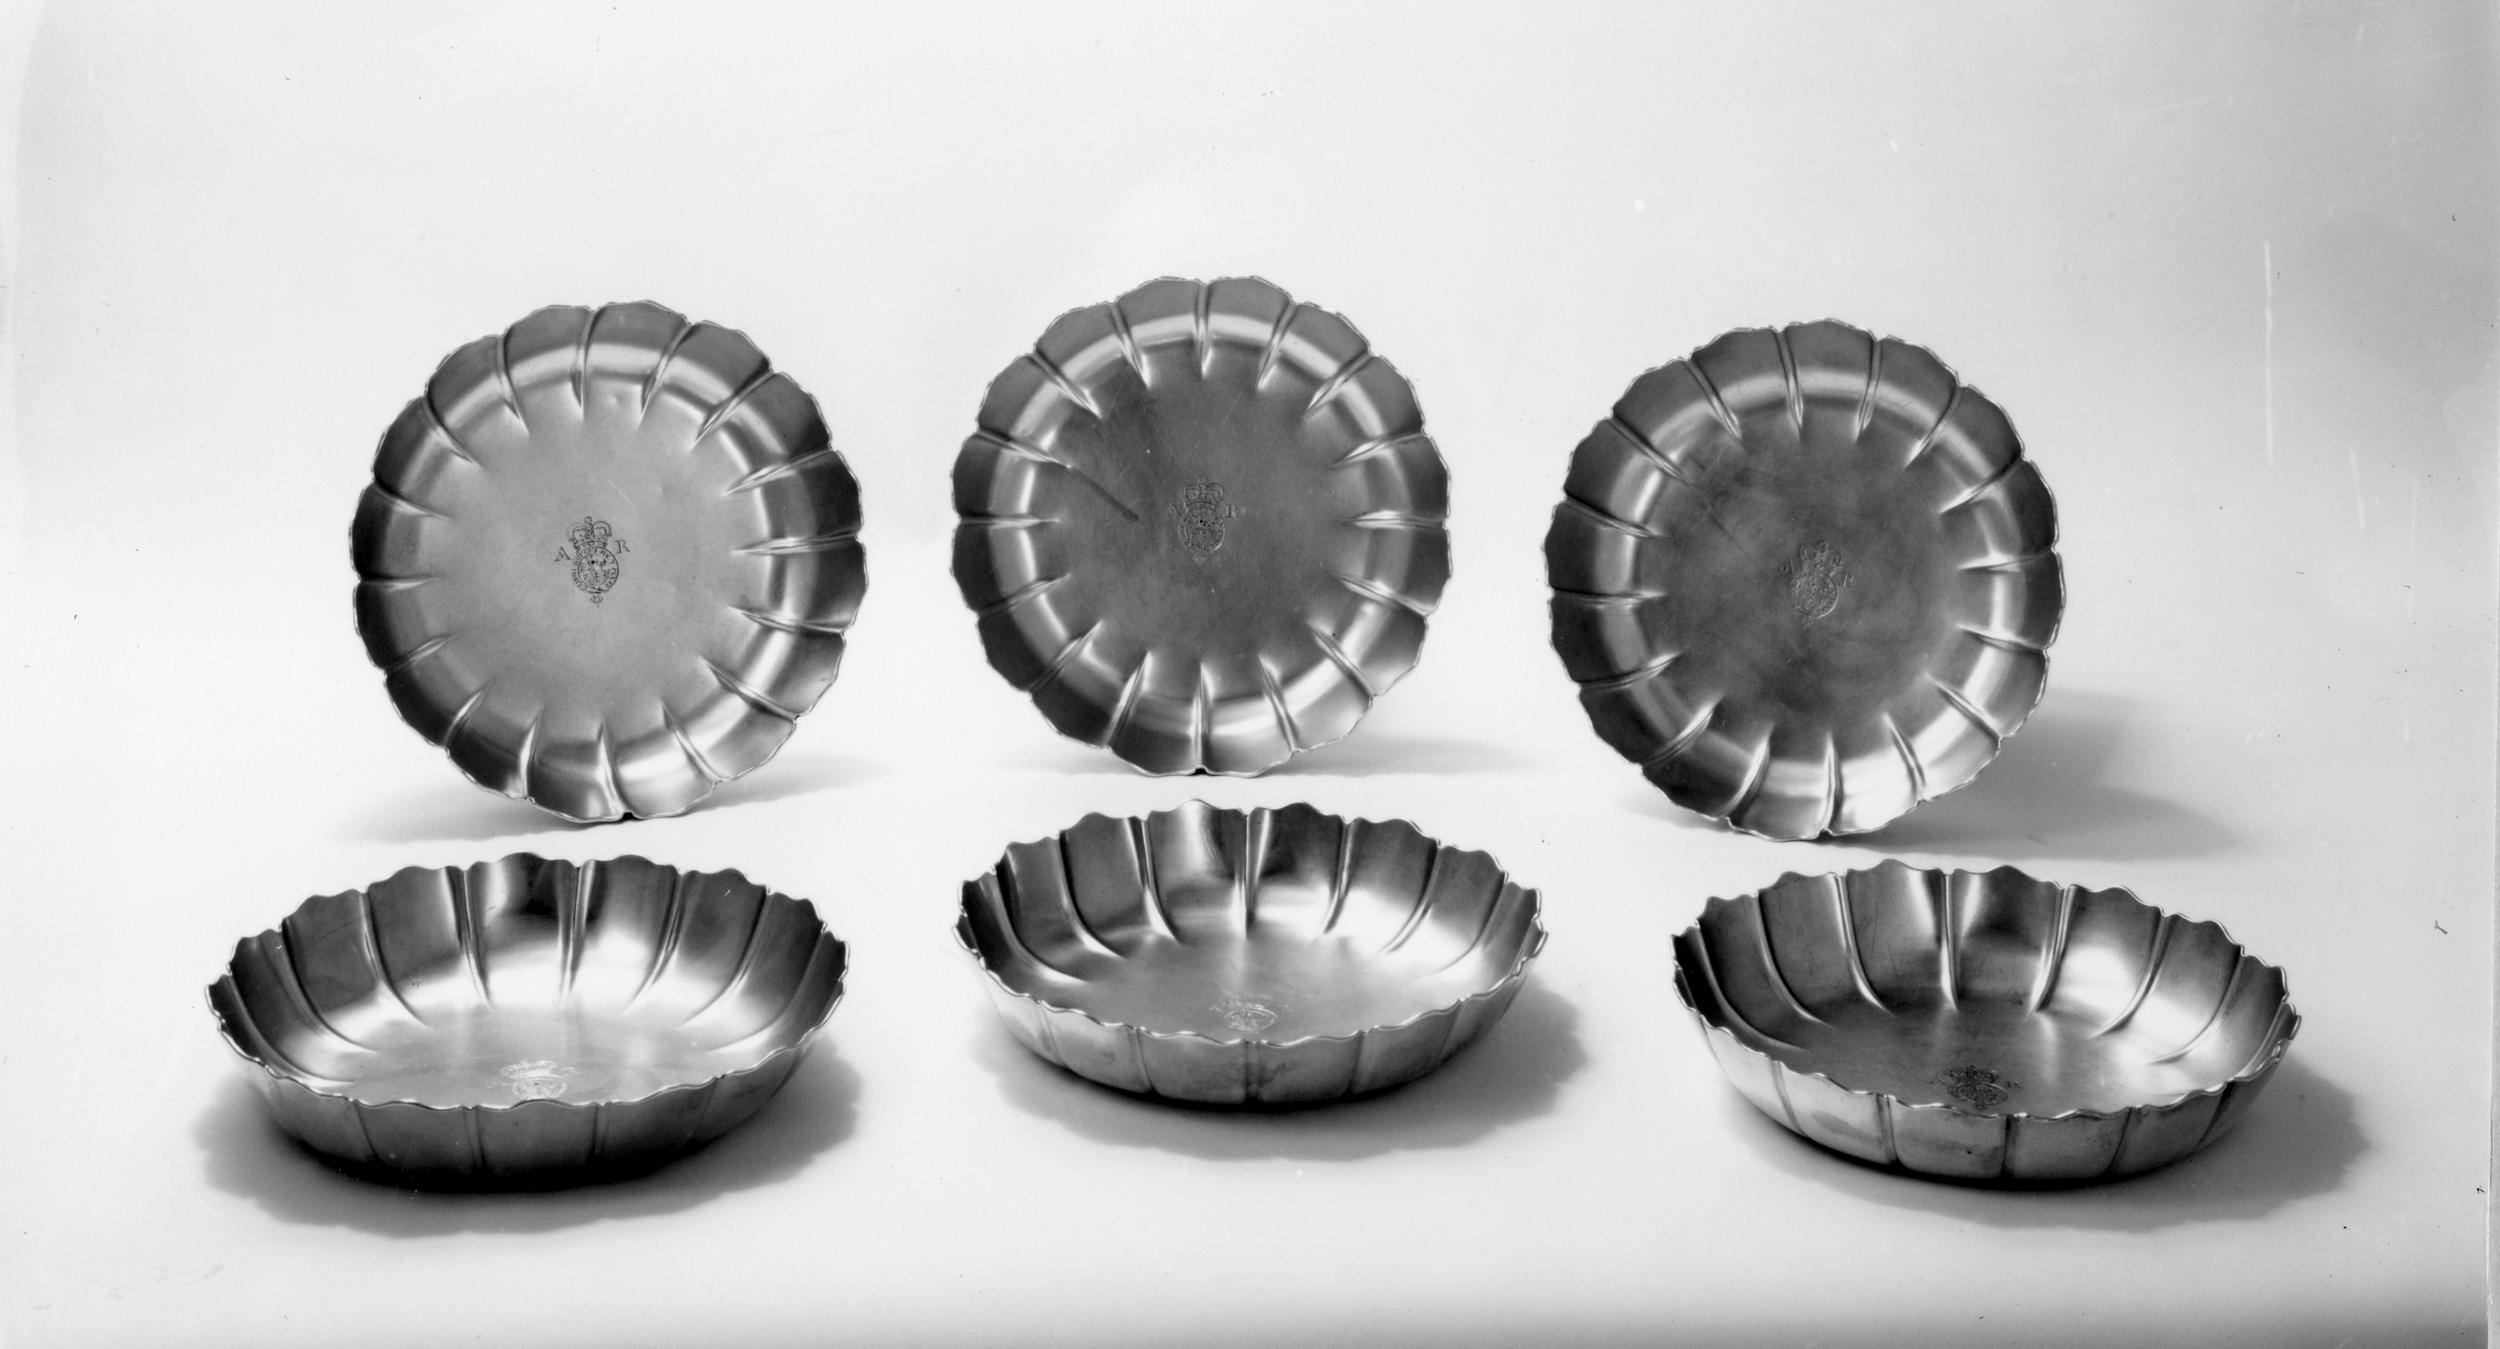 Silver serving dishes (set of 6) engraved with the Royal Arms of Queen Anne